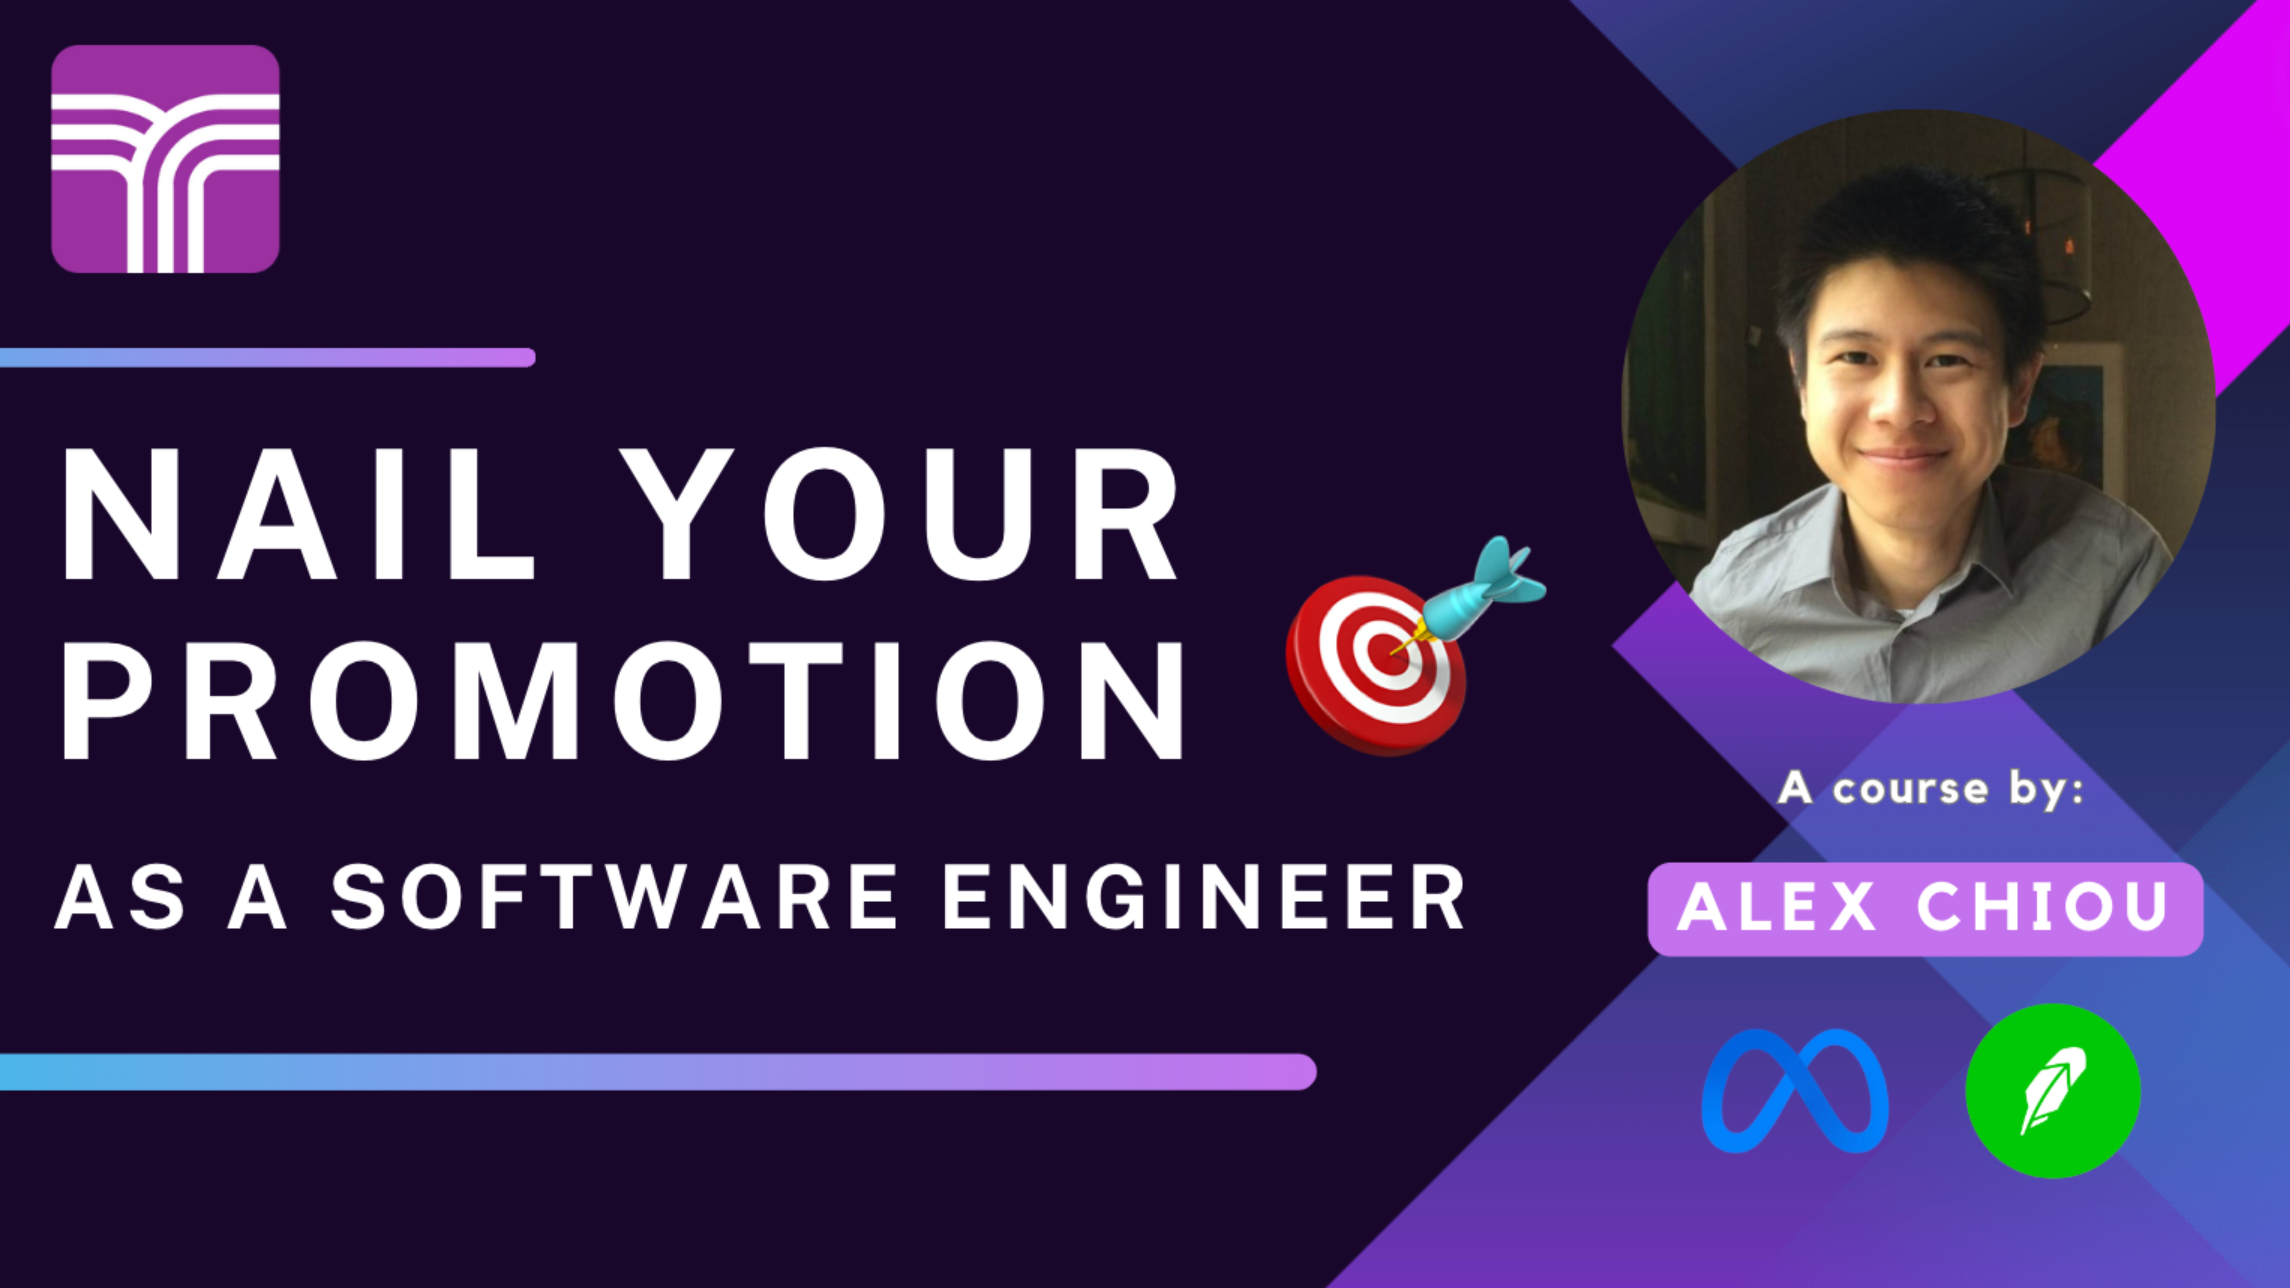 Nail Your Promotion As A Software Engineer course image